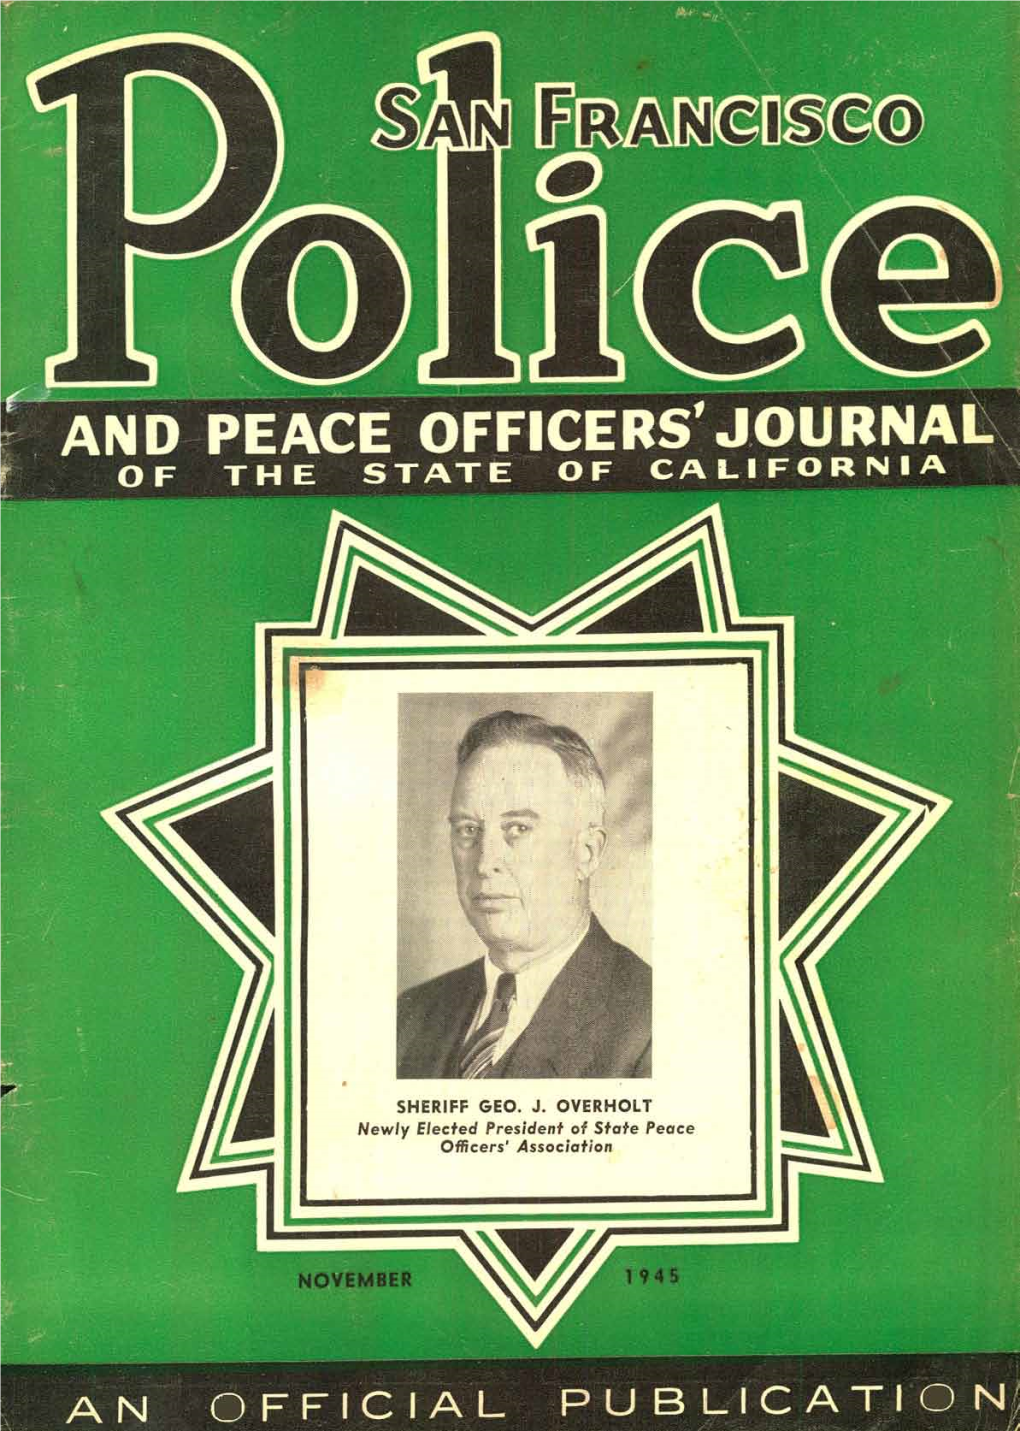 POLICE and PEACE OFFICERS JOURNAL November, 1945